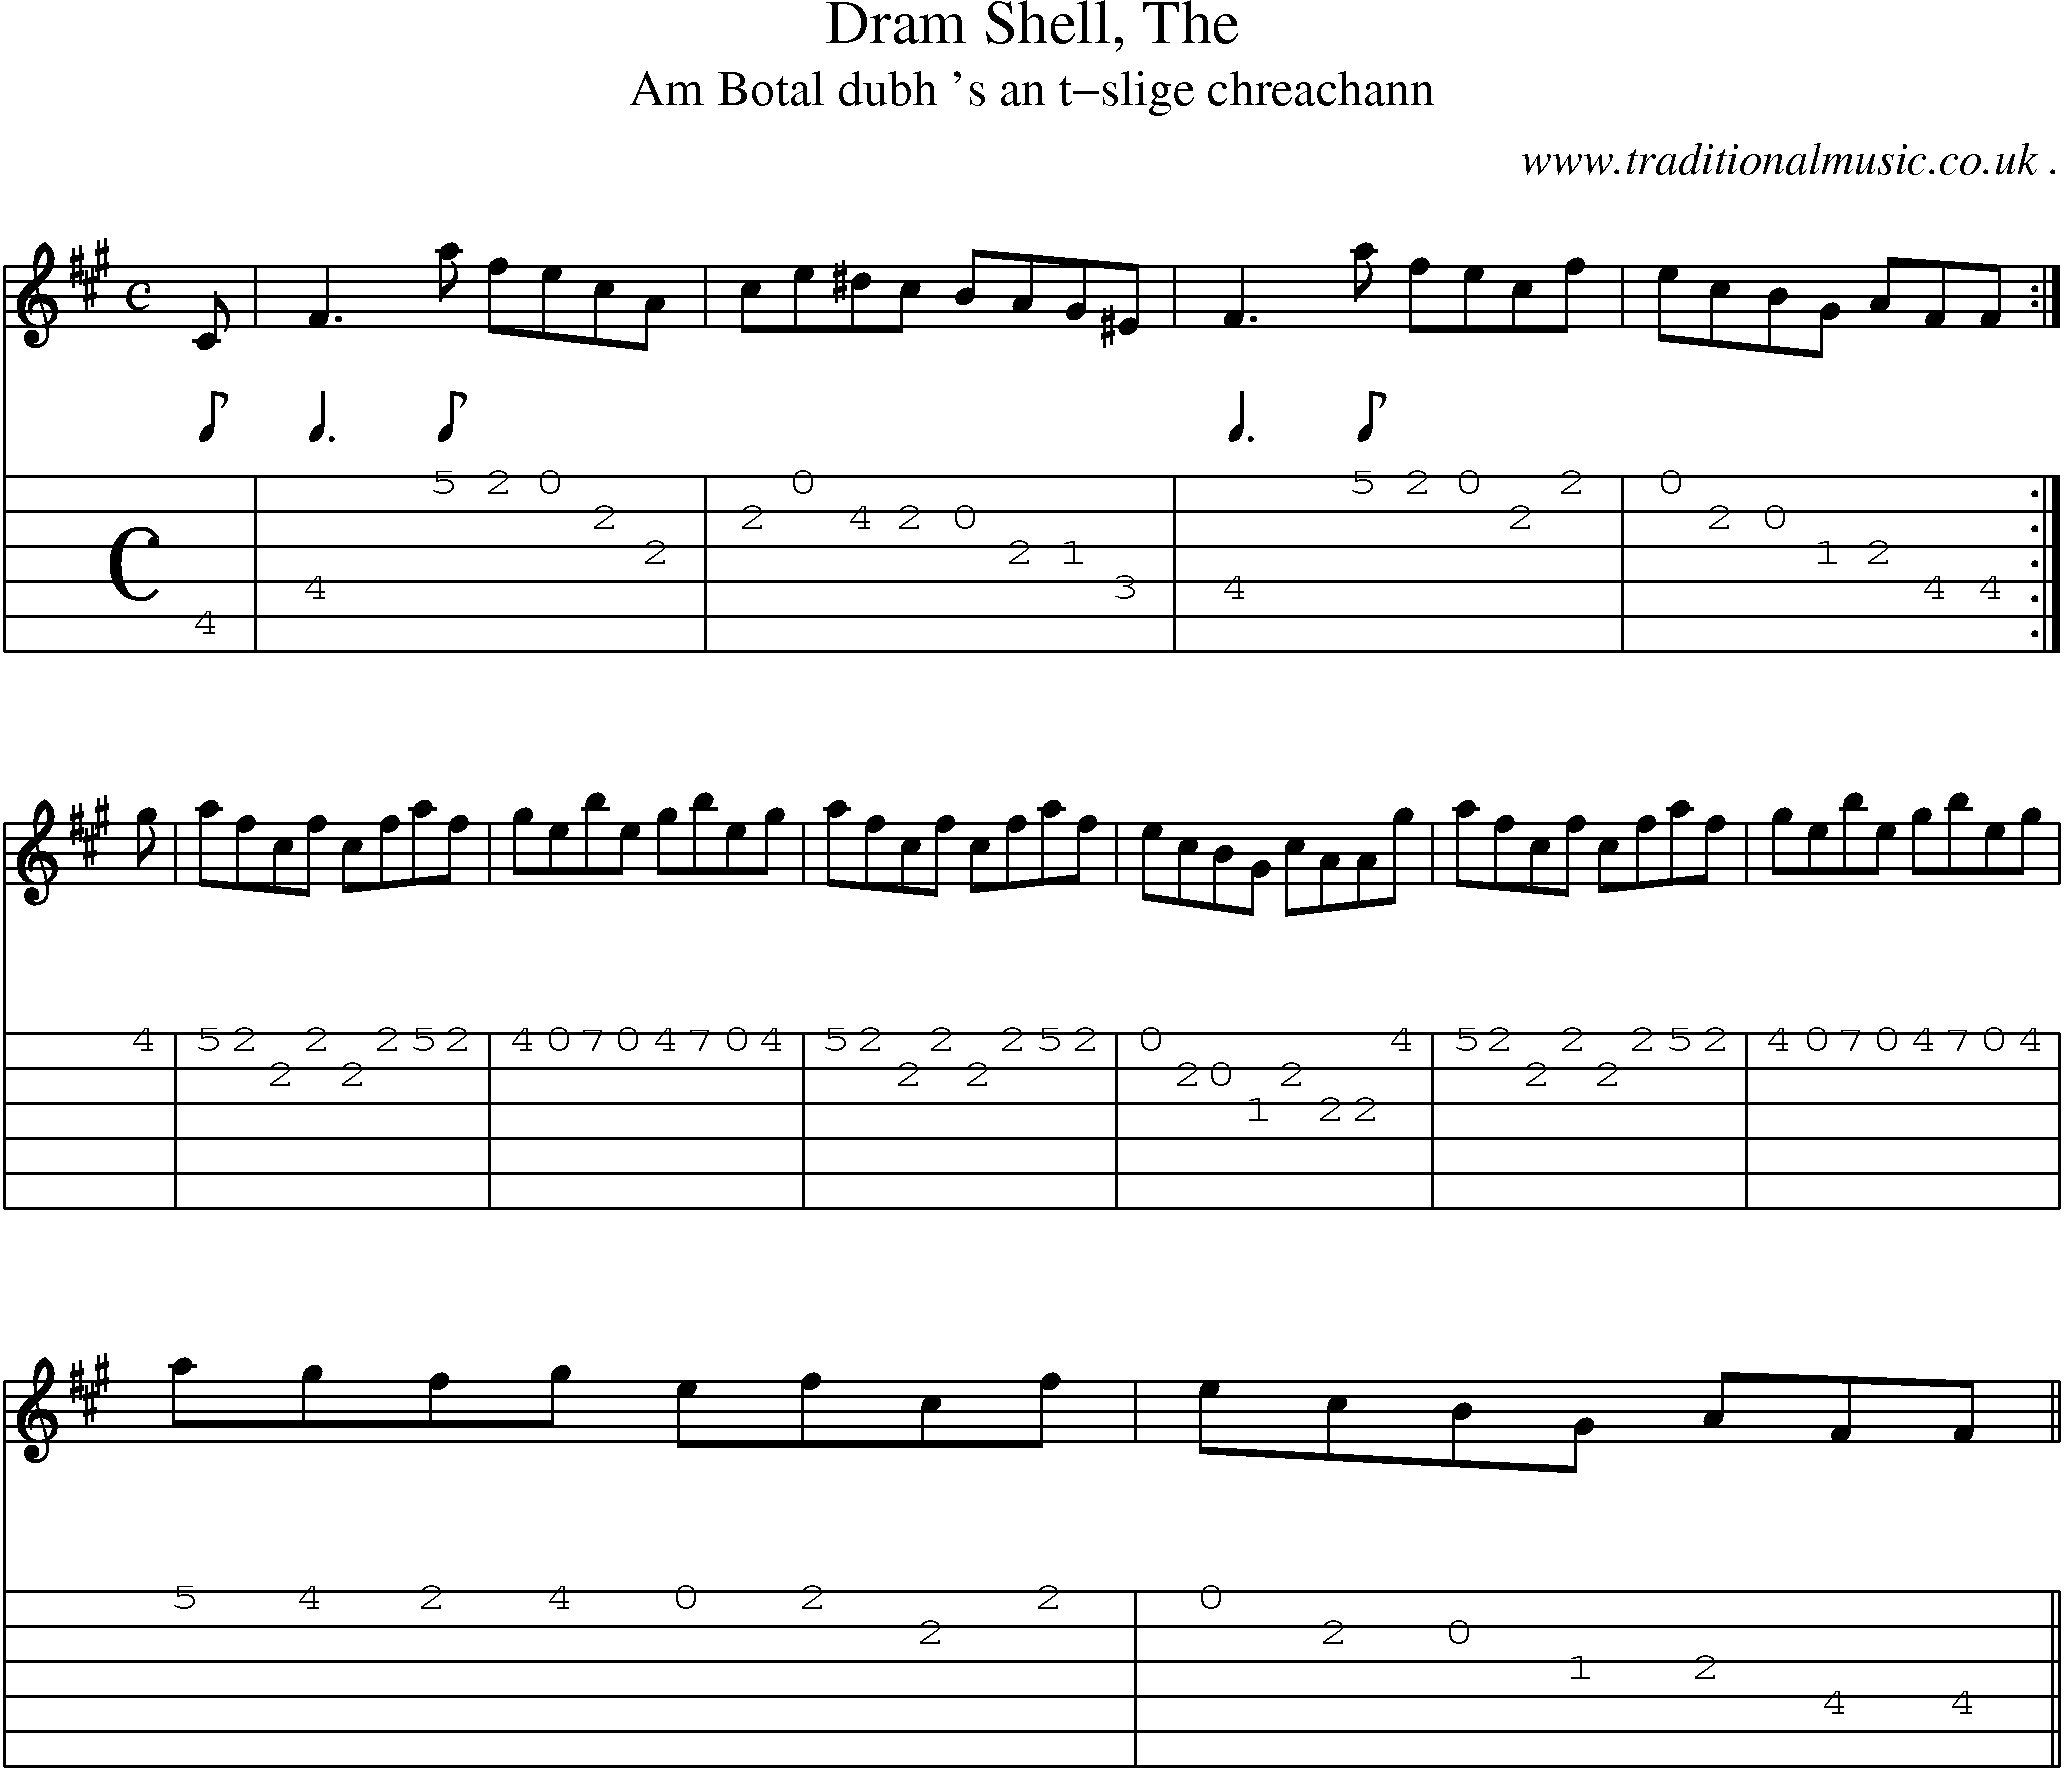 Sheet-music  score, Chords and Guitar Tabs for Dram Shell The